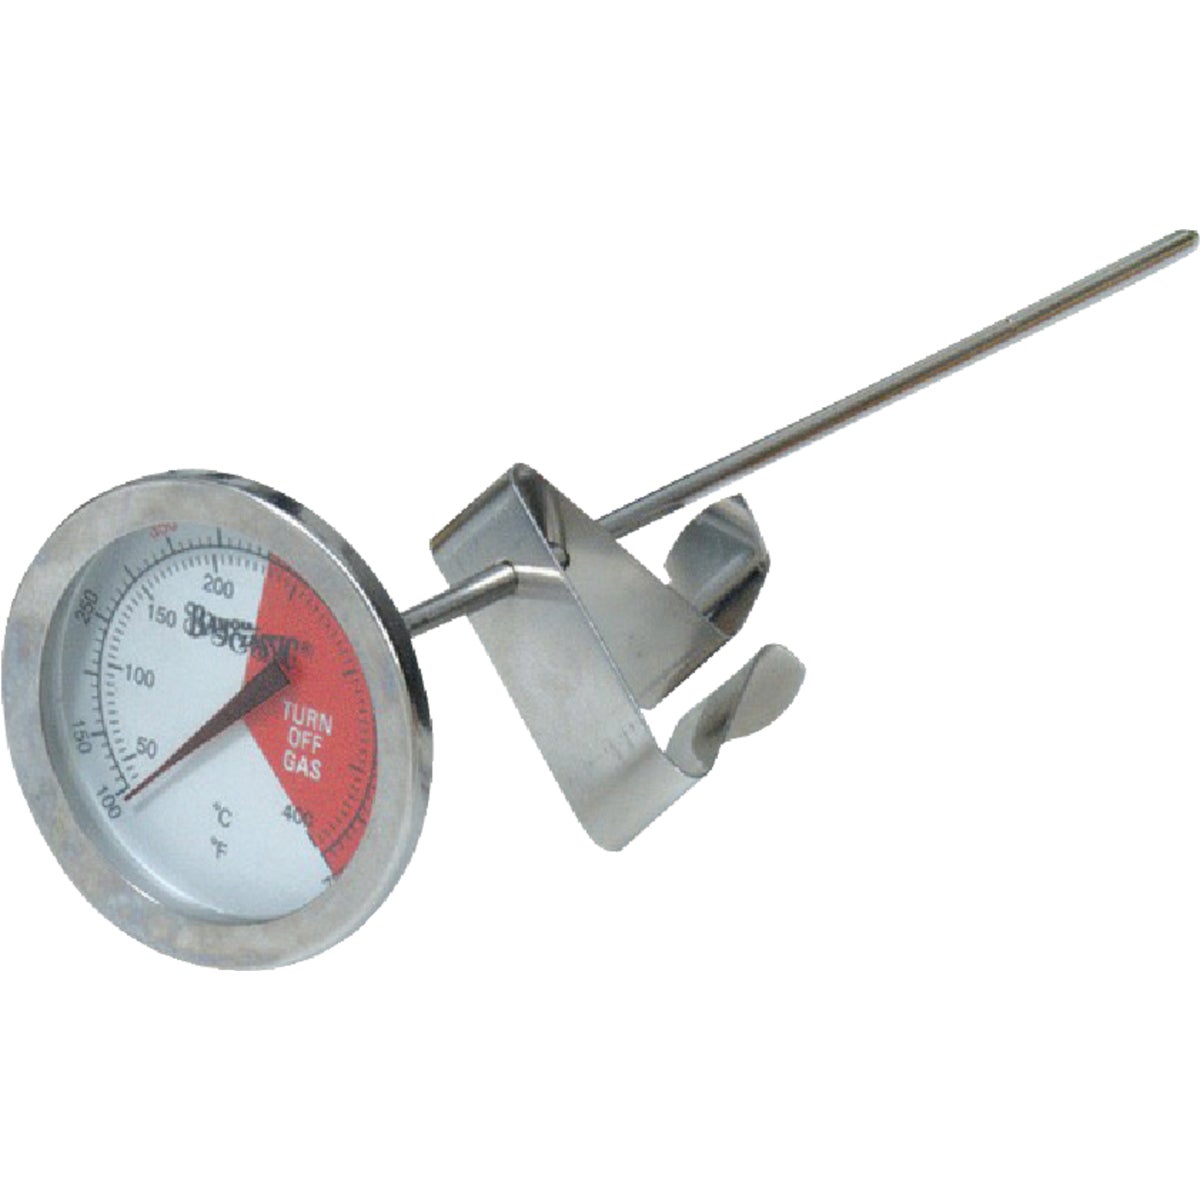 Item 803294, Durable stainless steel thermometer.